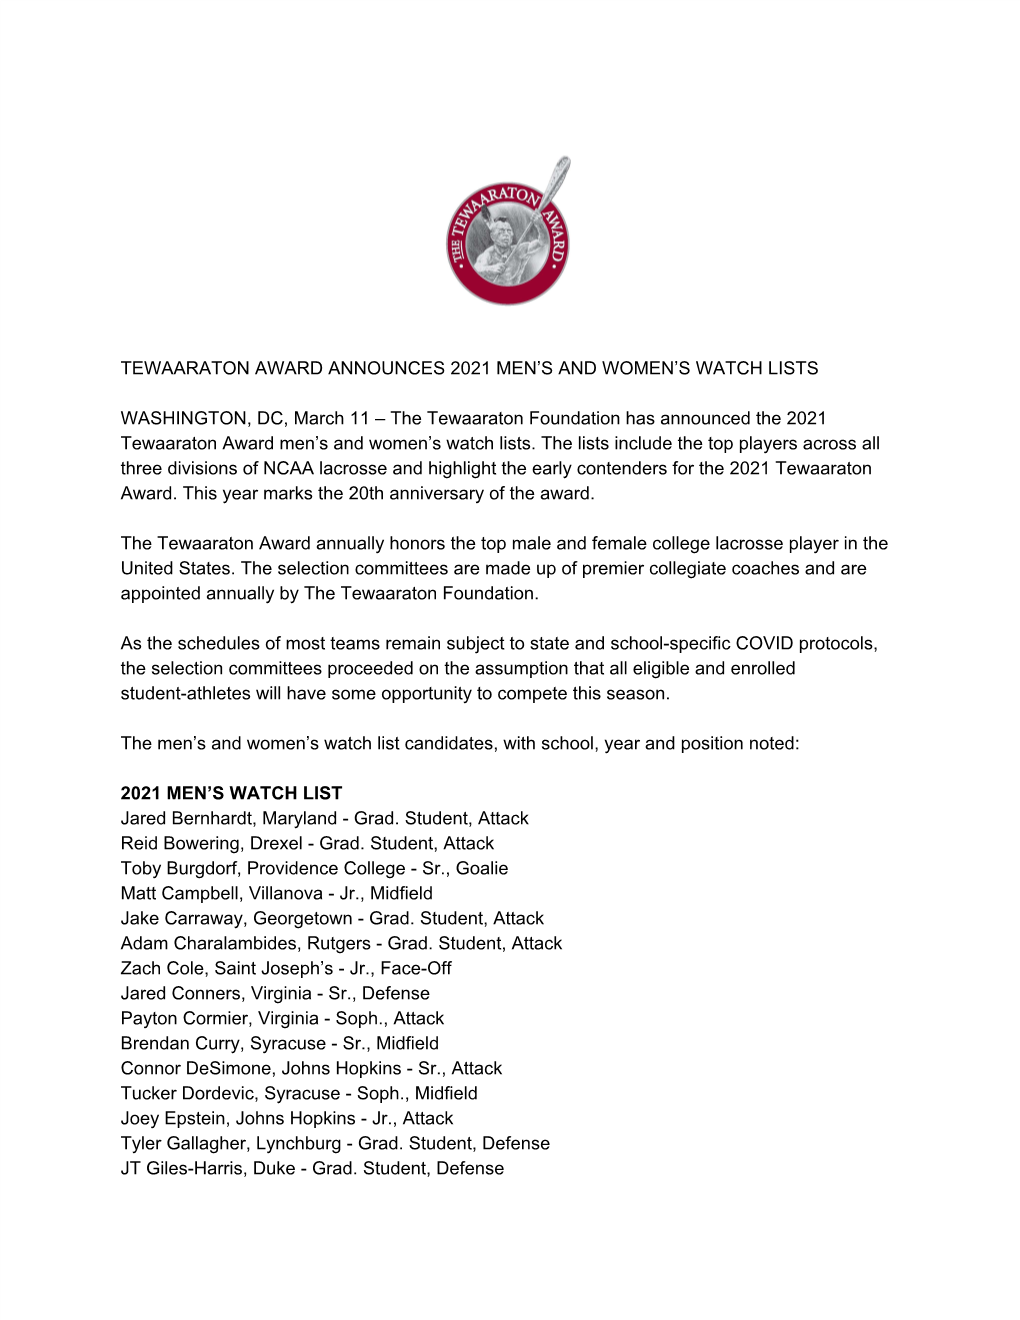 The Tewaaraton Foundation Has Announced the 2021 Tewaaraton Award Men’S and Women’S Watch Lists